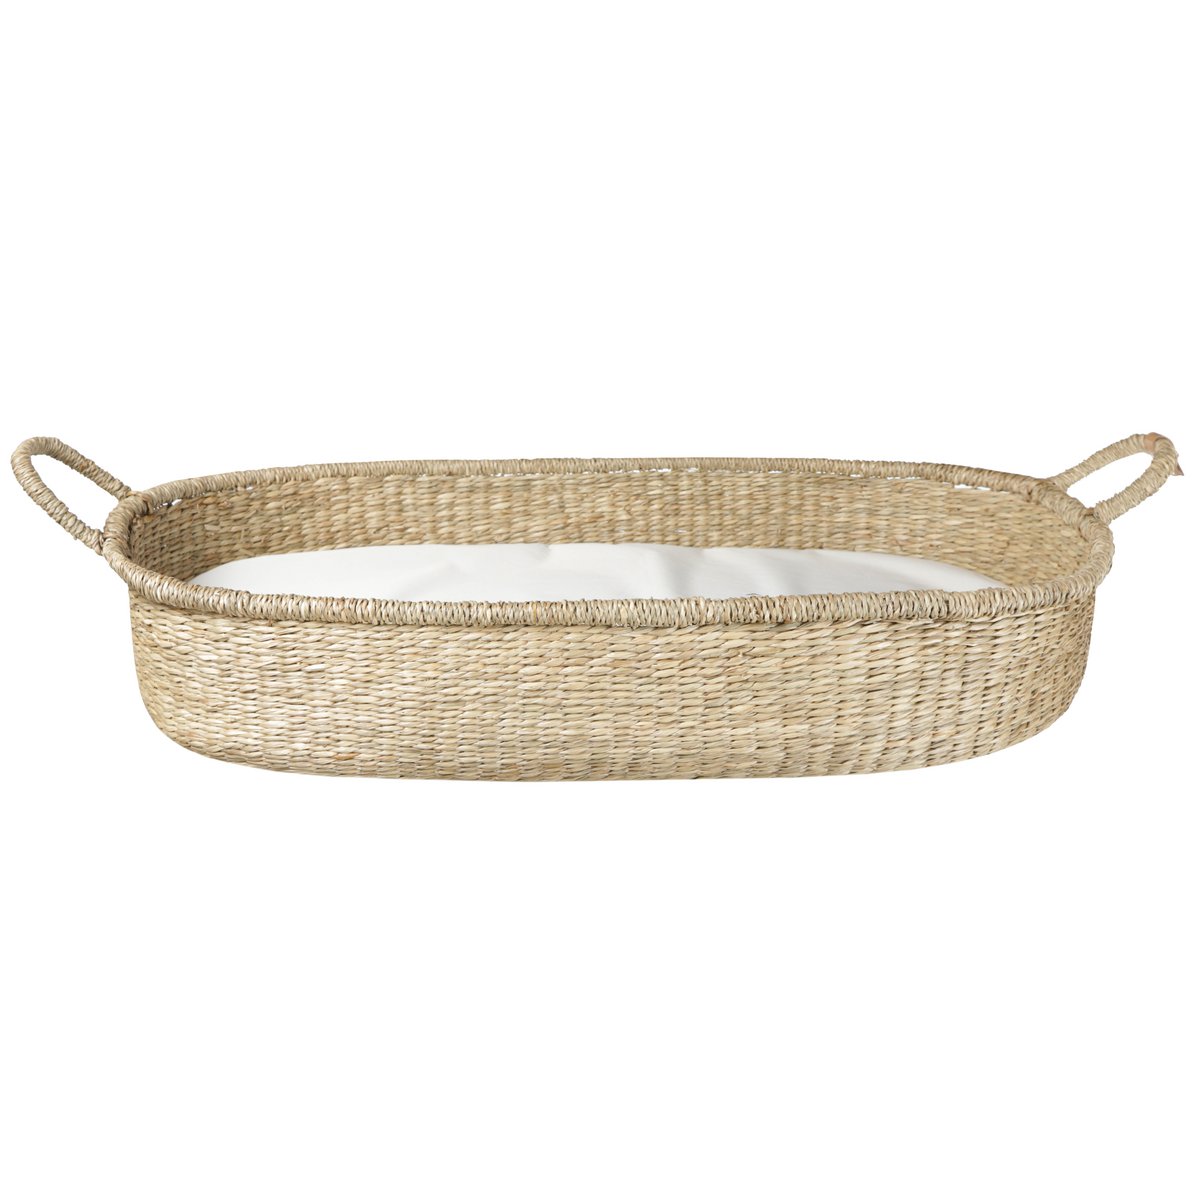 Seagrass Changing basket including mattress